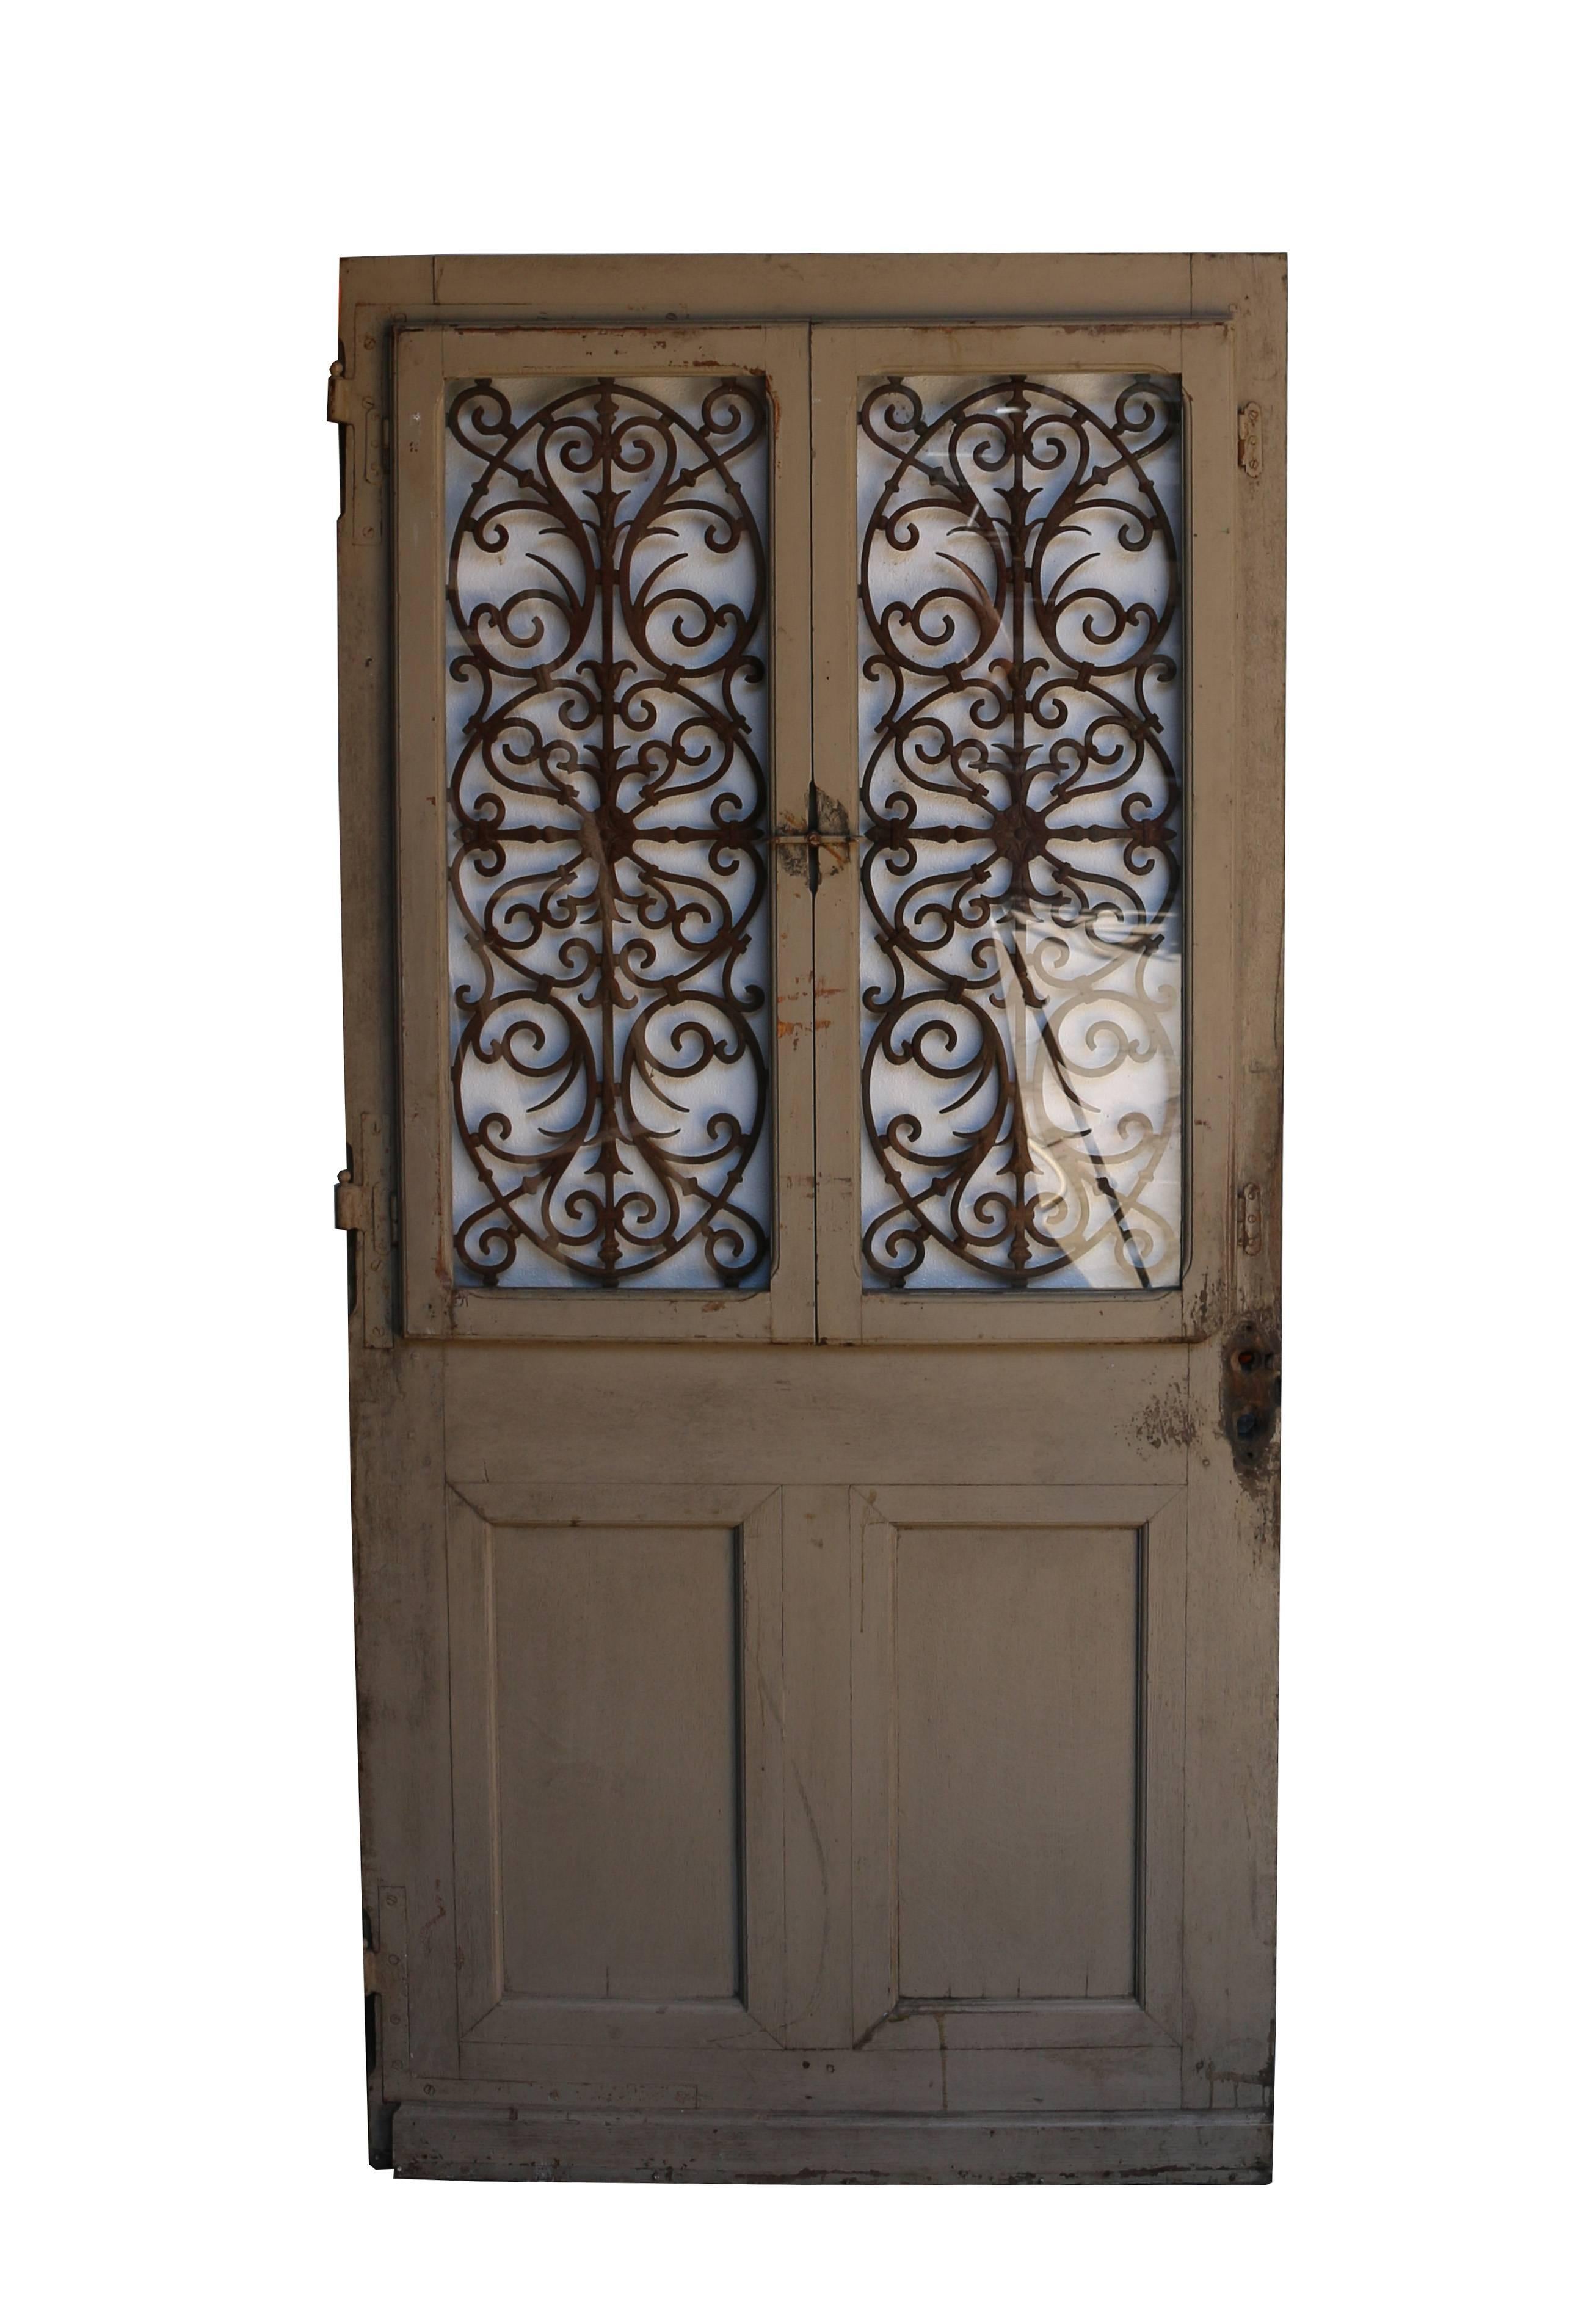 Excellent quality door with a great weathered and distressed paint look.